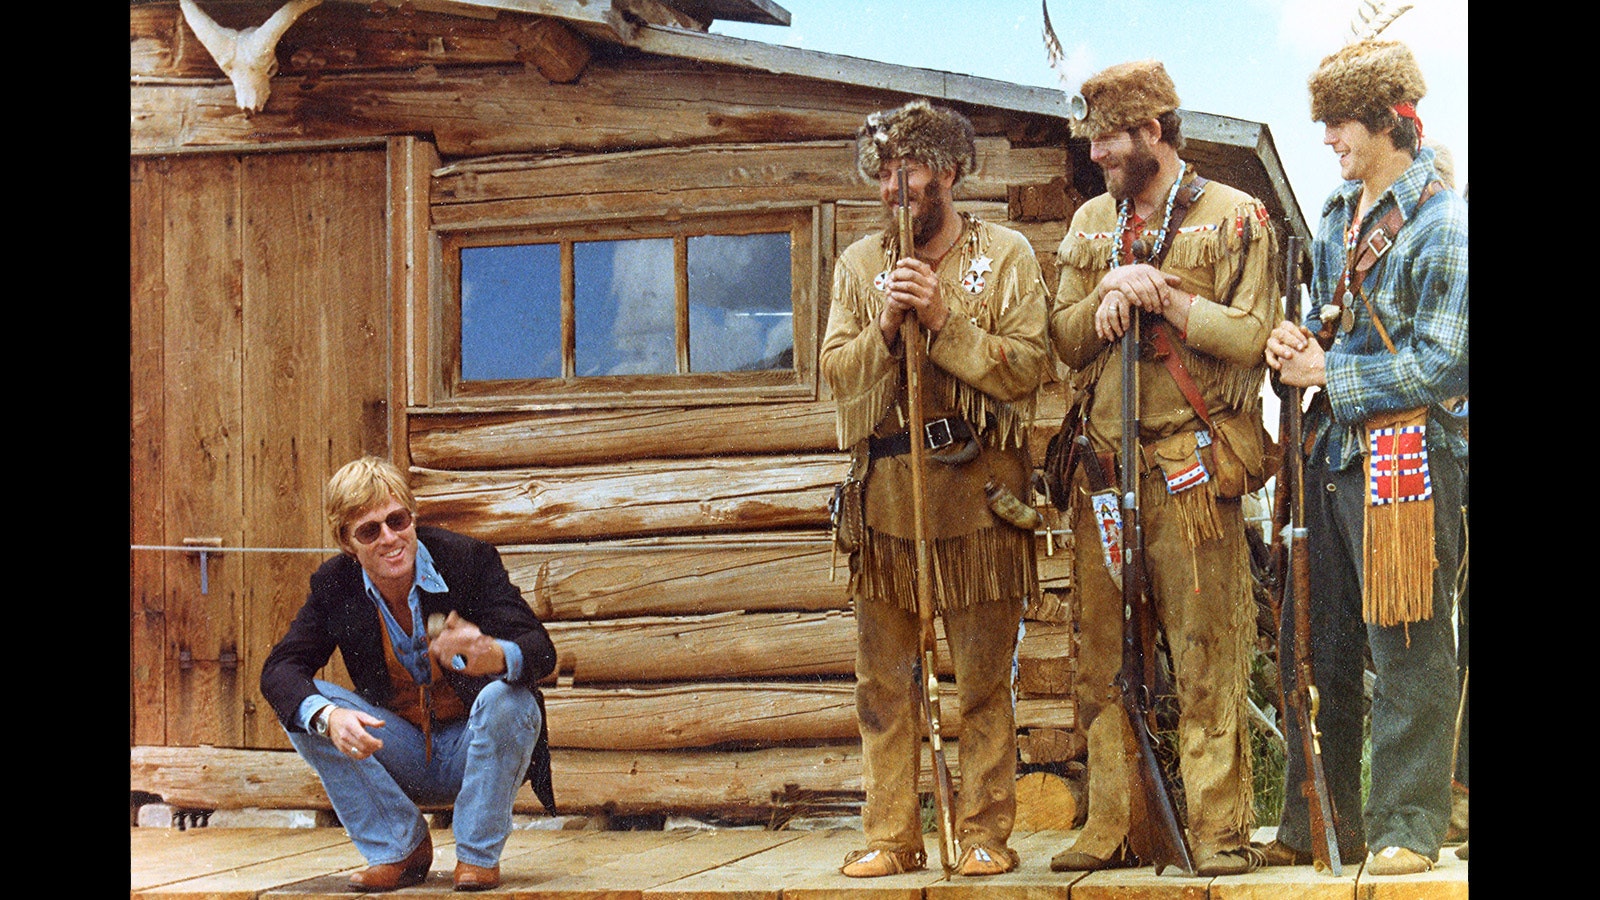 Robert Redford shares a laugh with a group of mountain men at the reburial of Liver-Eating Johnson in Cody's Old Trail Town.